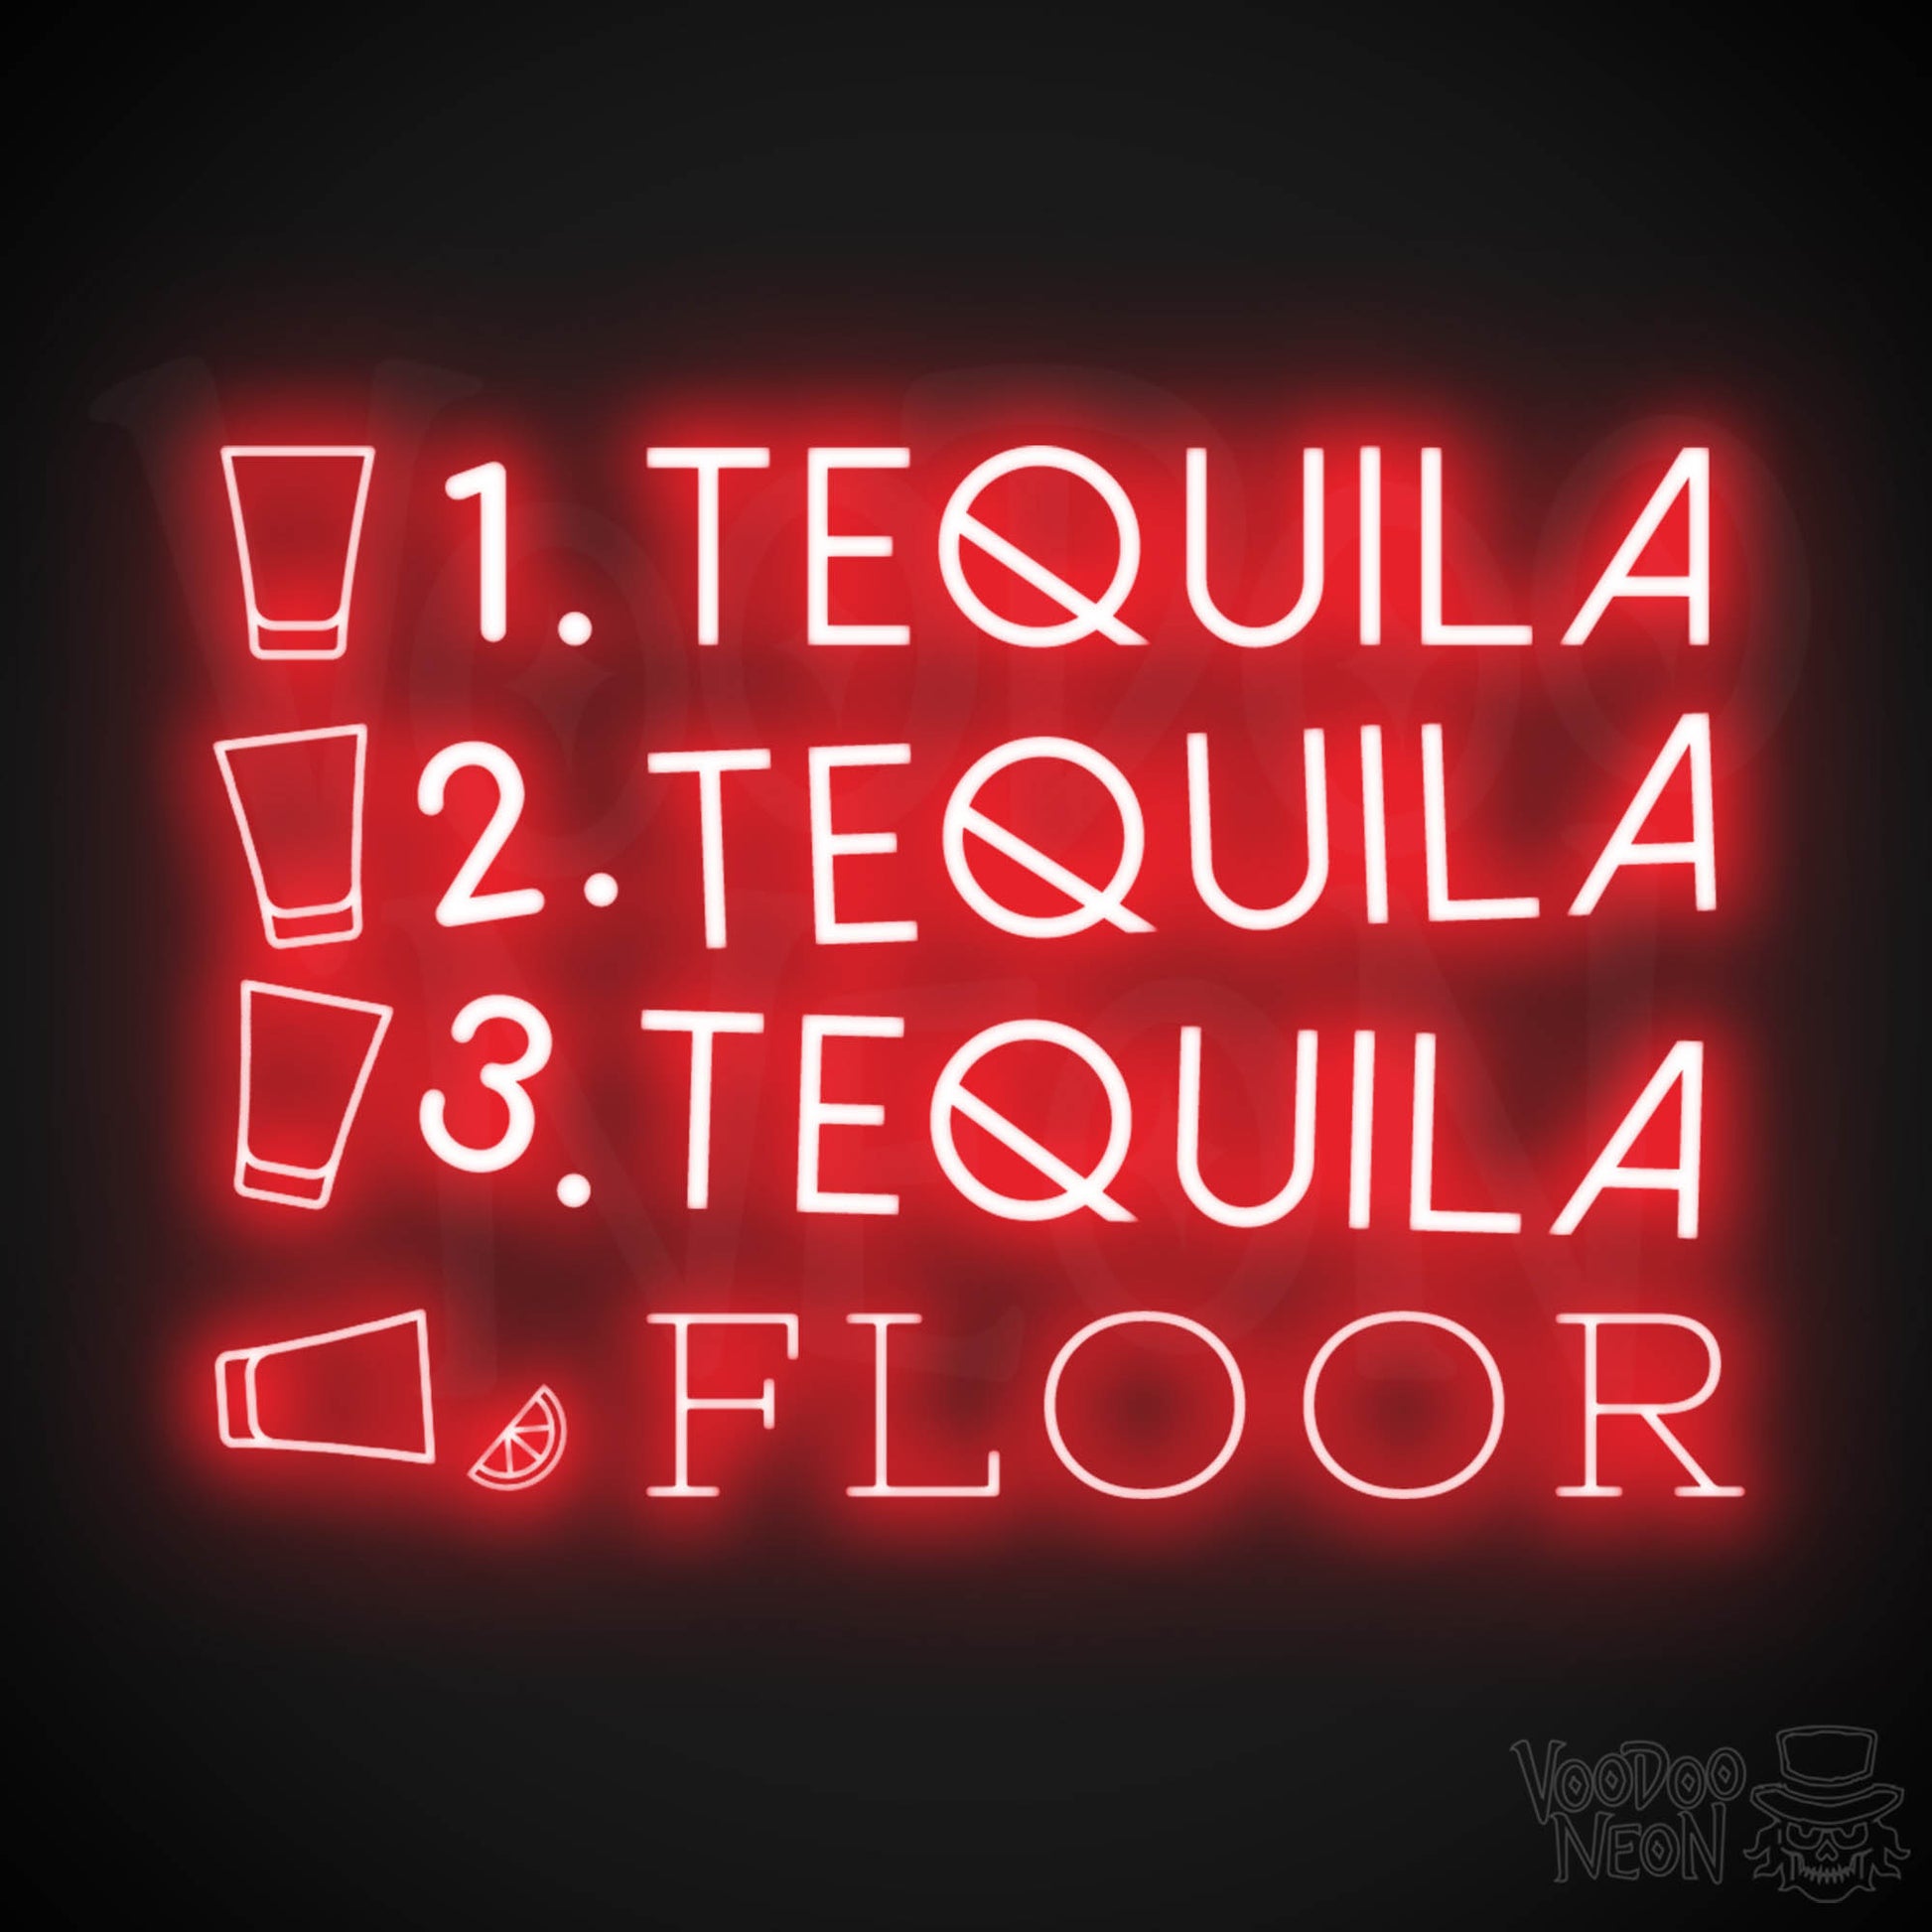 One Tequila Two Tequila Three Tequila Floor Neon sign - Neon Wall Art - Color Red